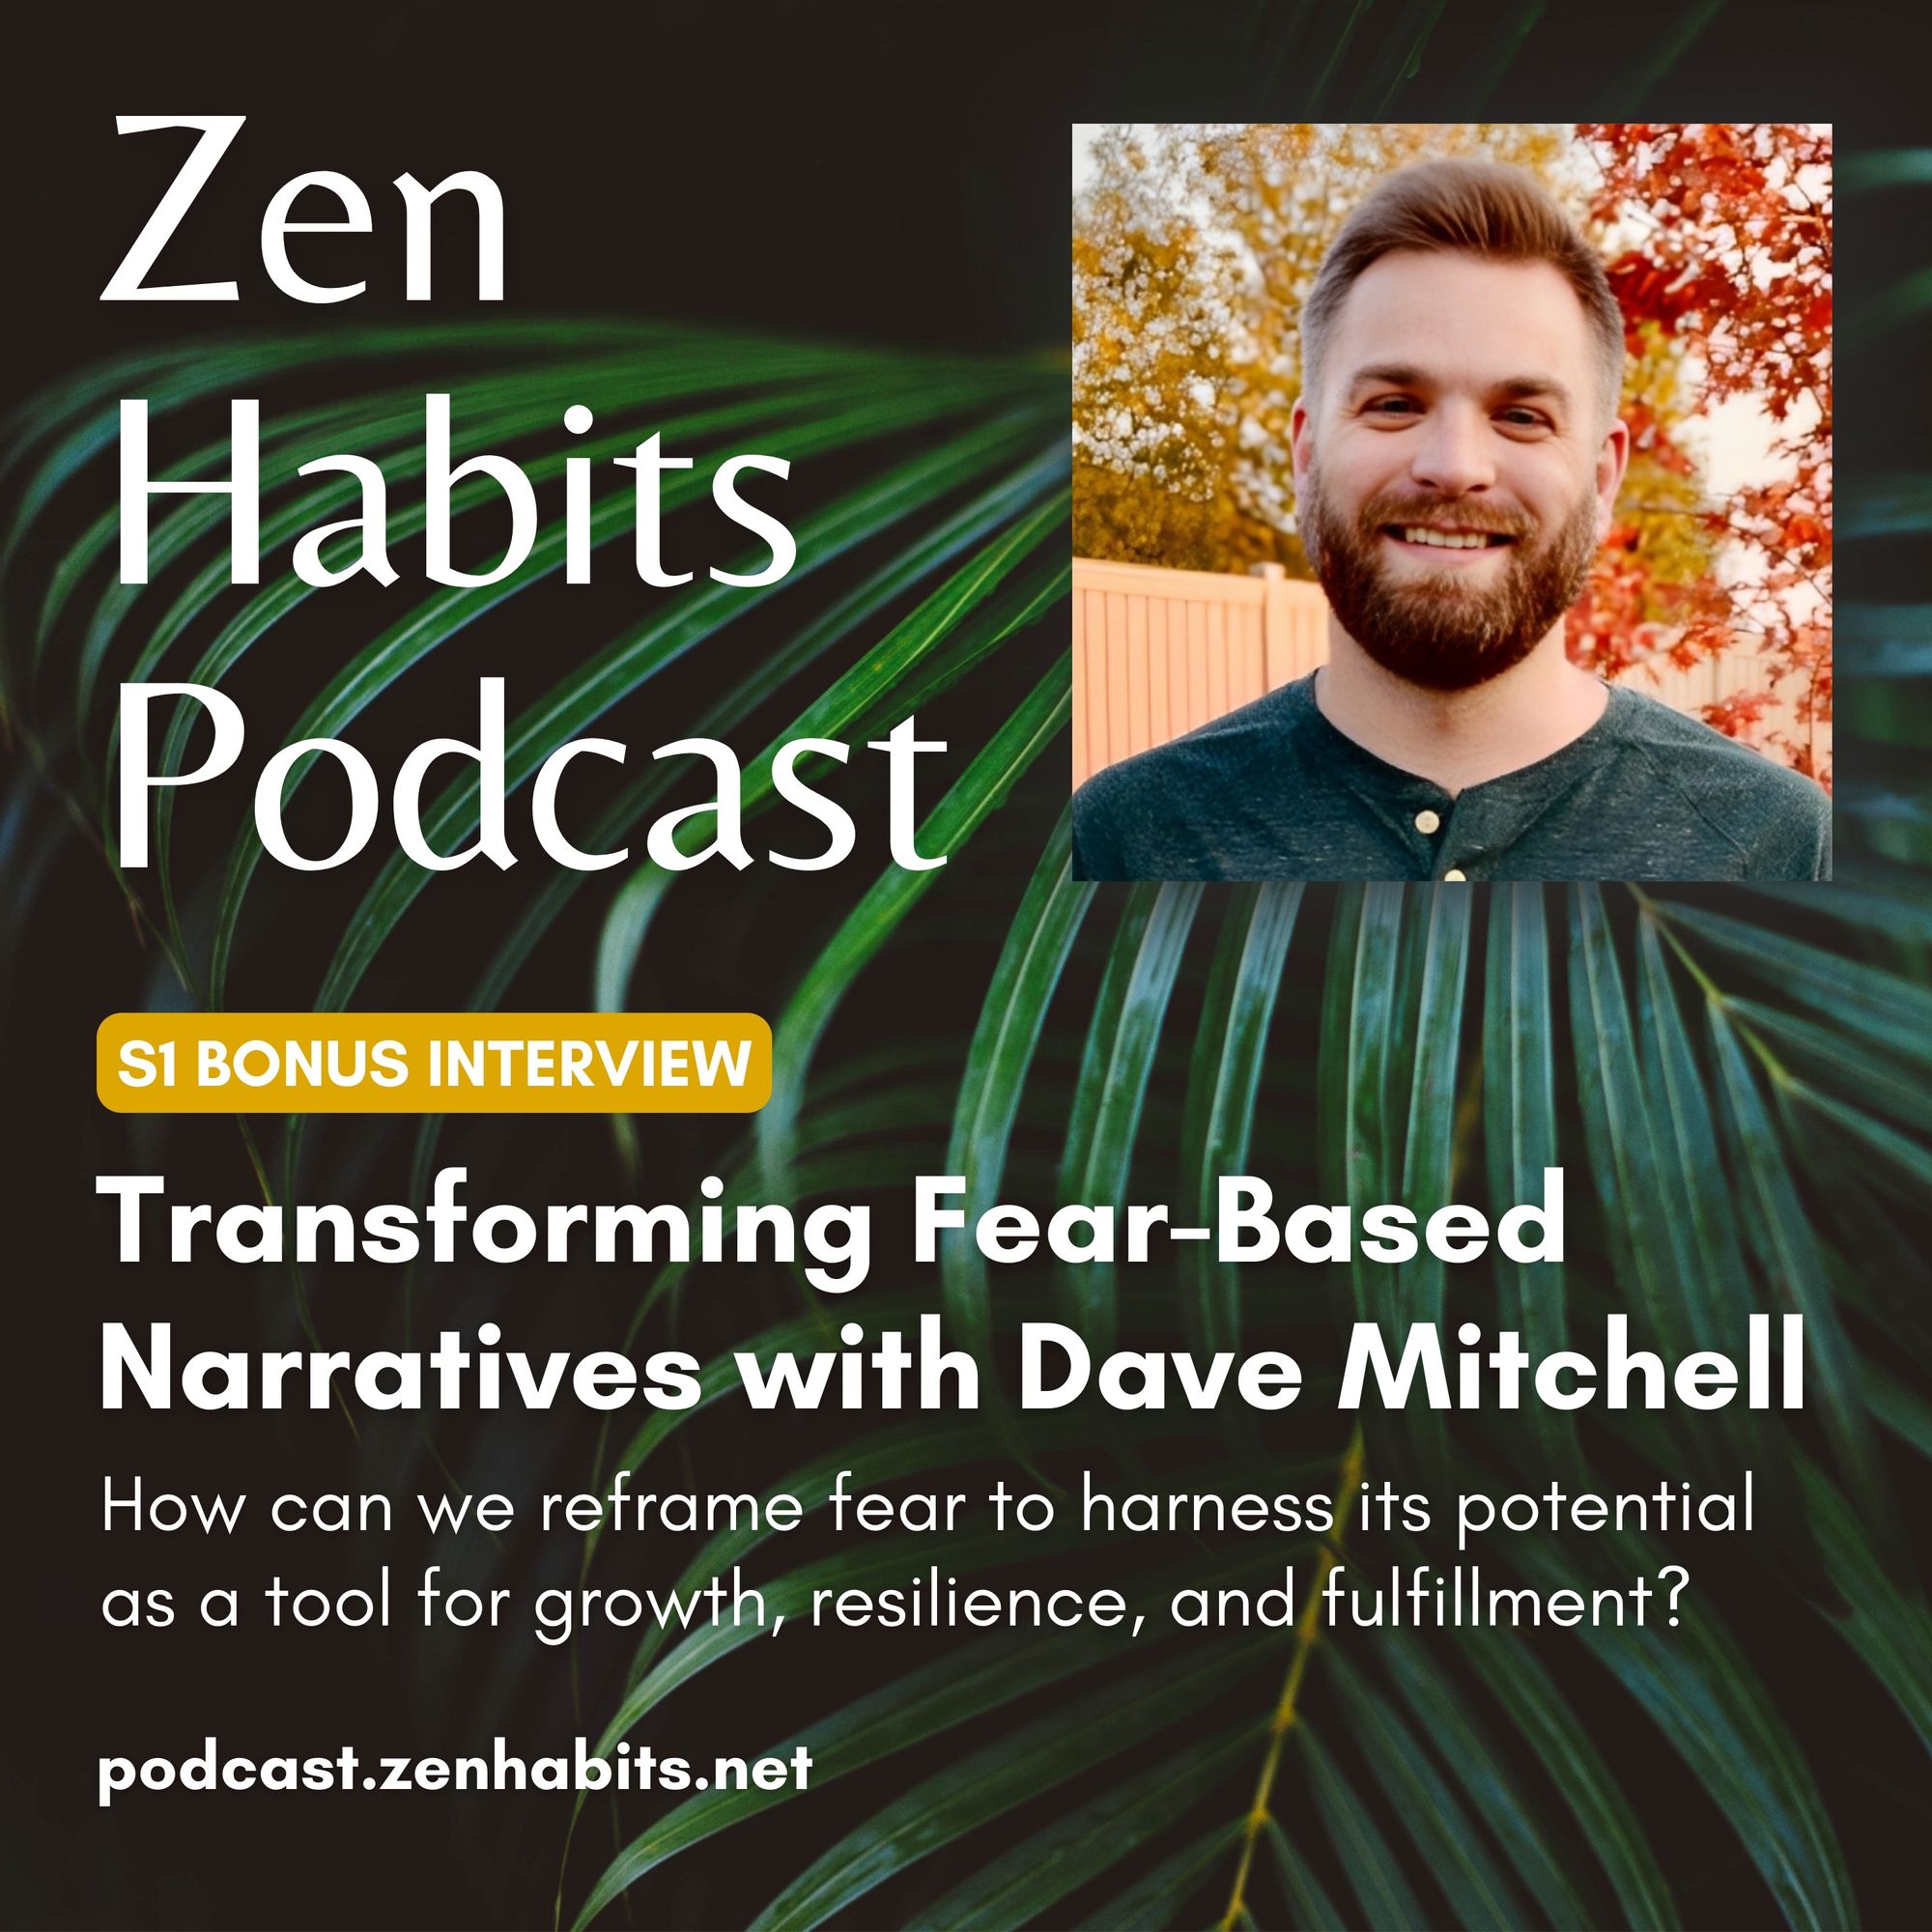 S1 Bonus - Transforming Fear-Based Narratives with Dave Mitchell